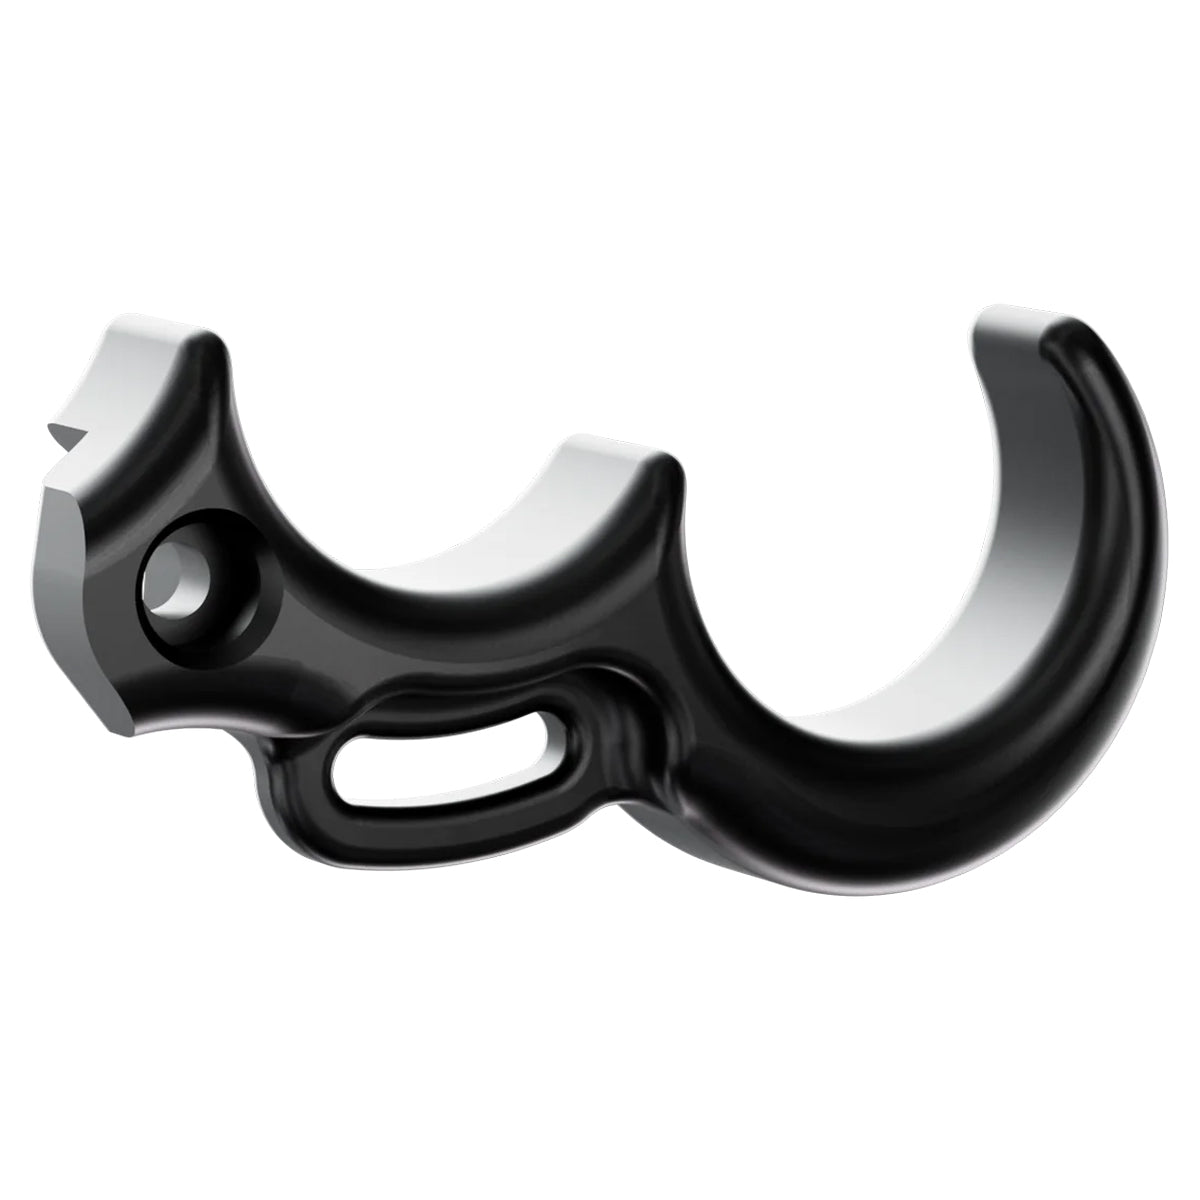 Ultraview Archery The Hinge 2 Finger Attachments in  by GOHUNT | Ultraview Archery - GOHUNT Shop